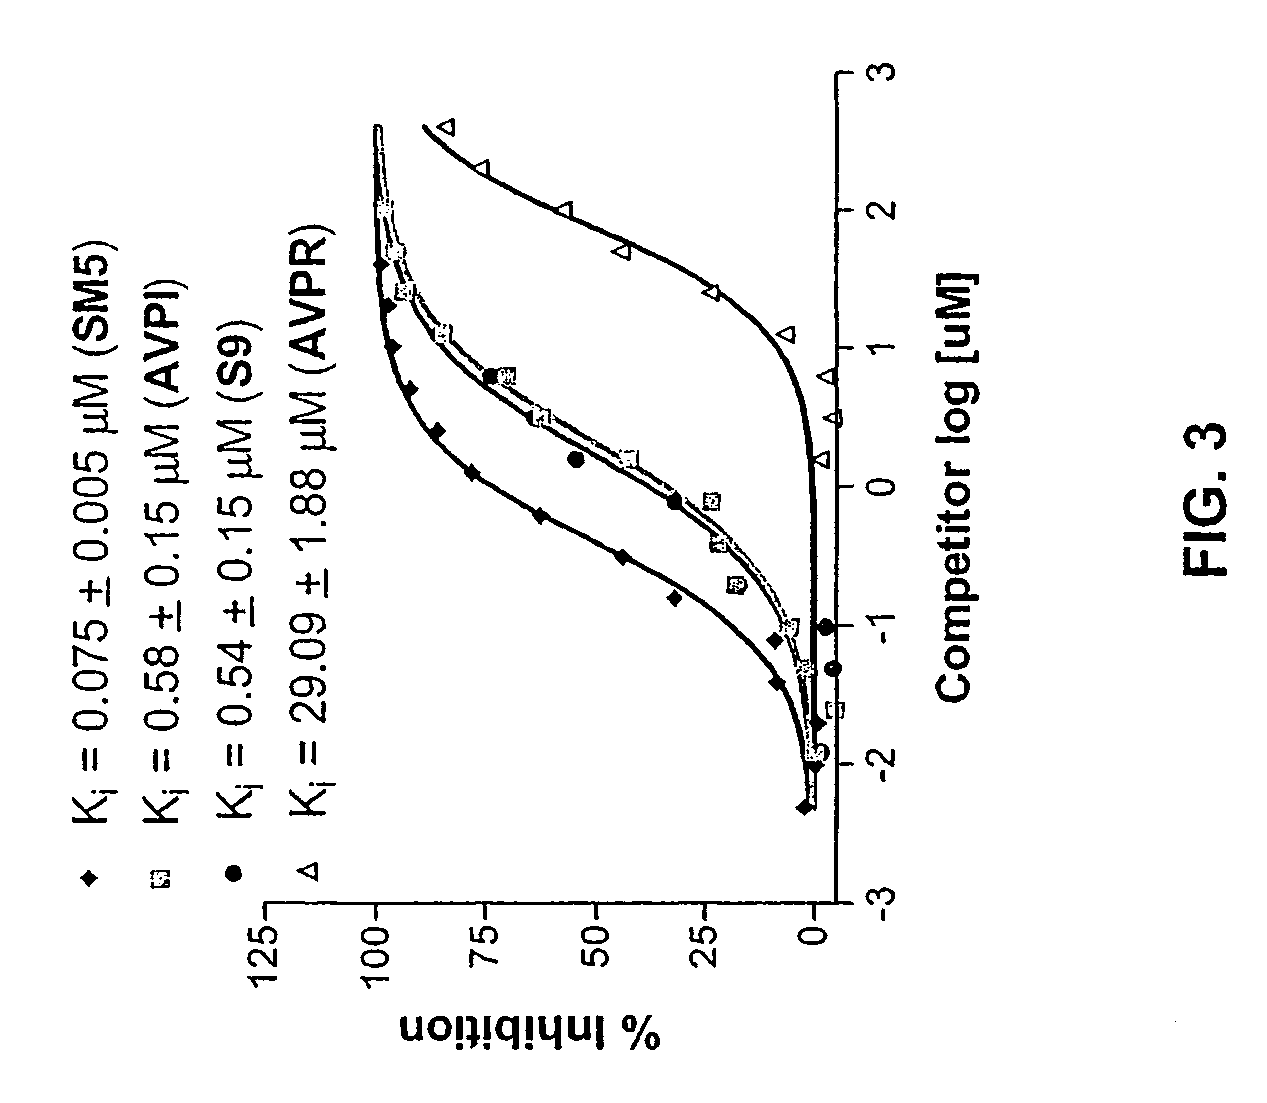 Conformationally constrained Smac mimetics and the uses thereof